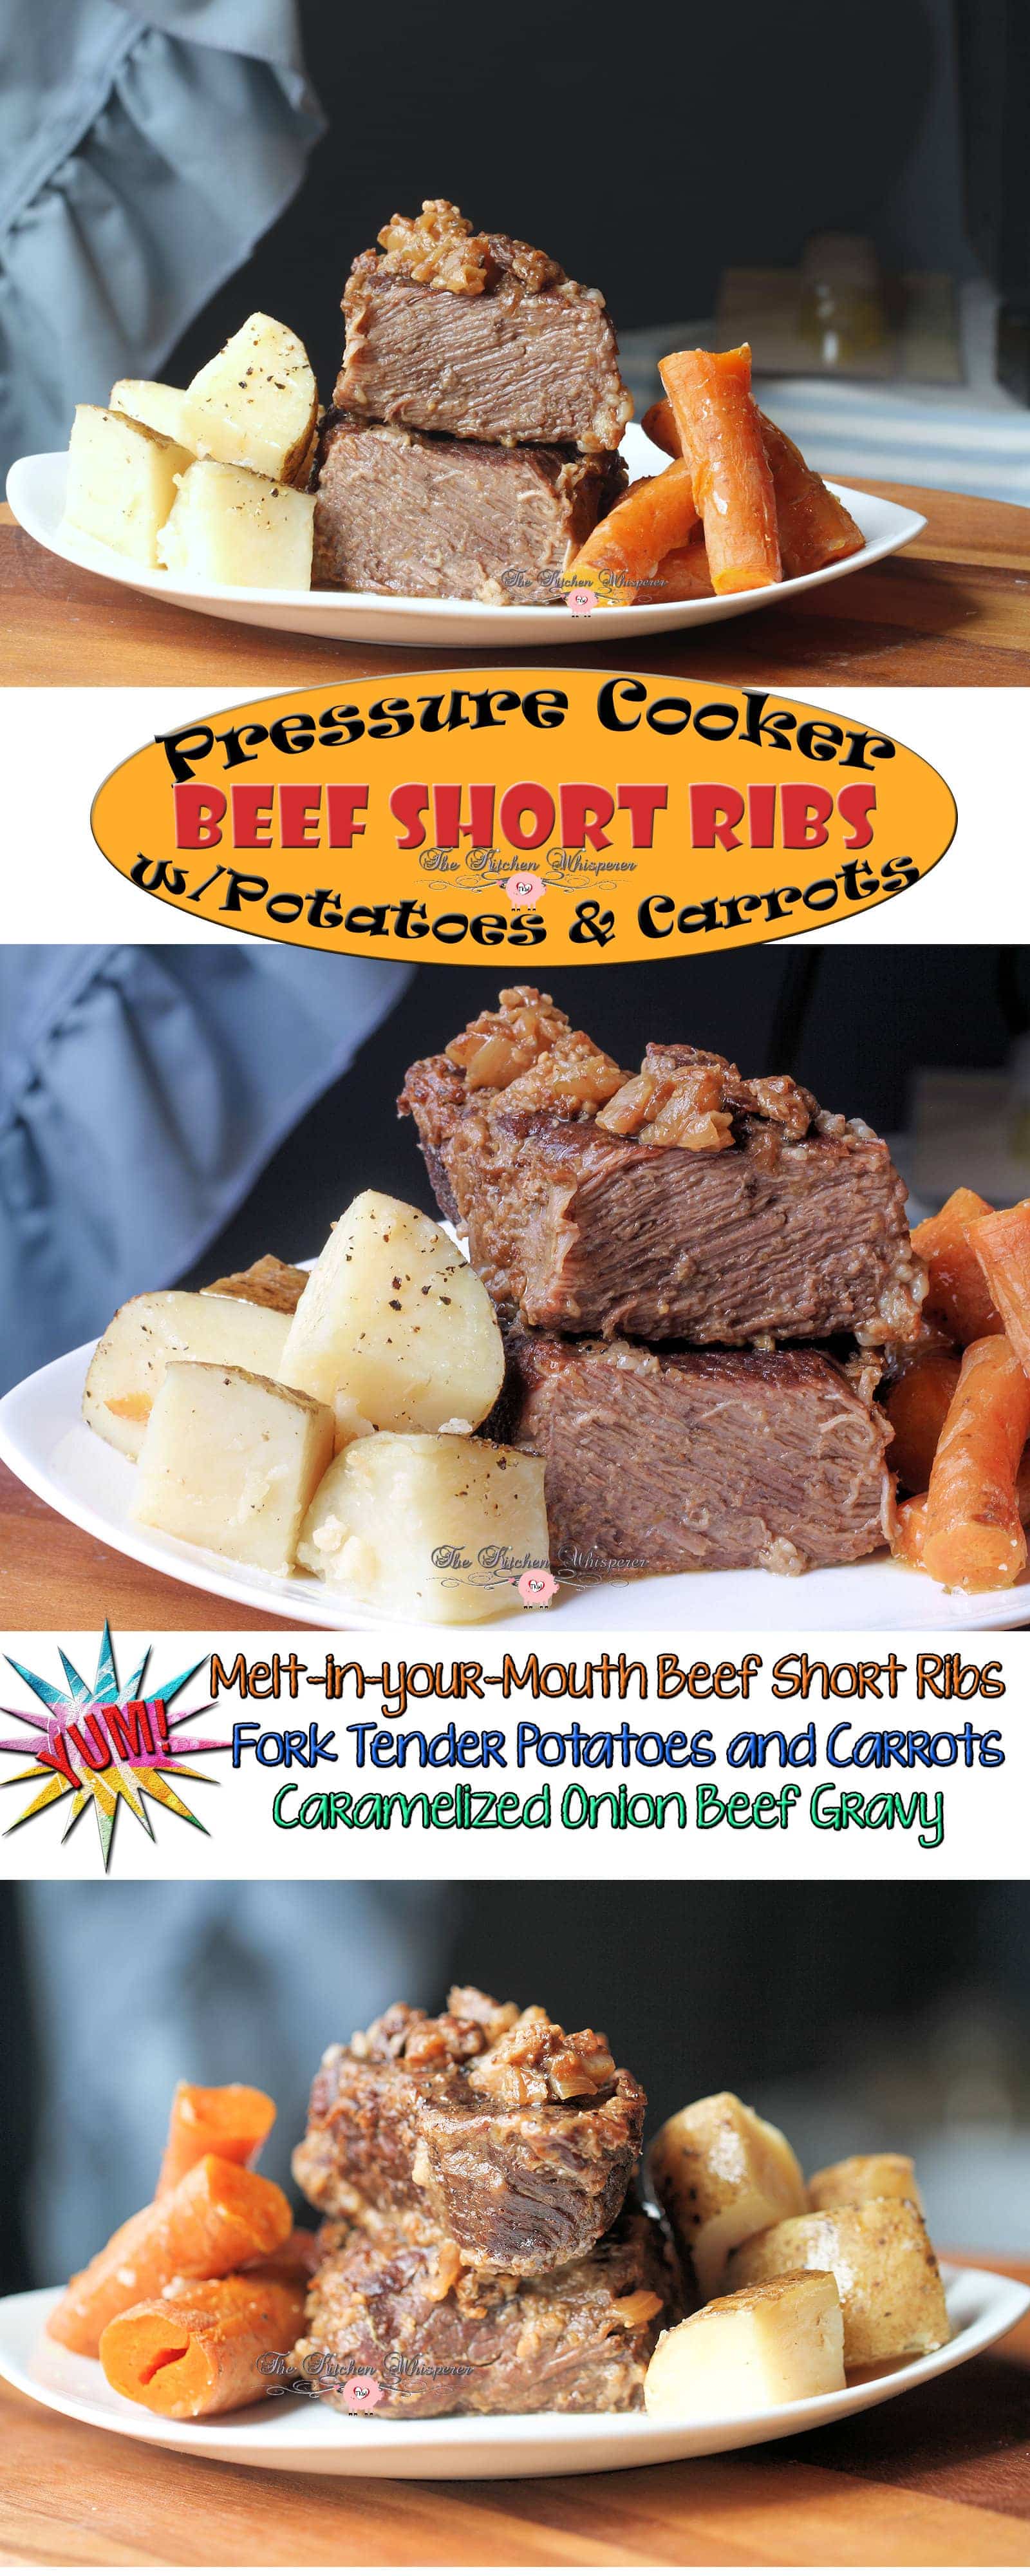 Pressure Cooker Beef Short Ribs Taters Carrots Collage